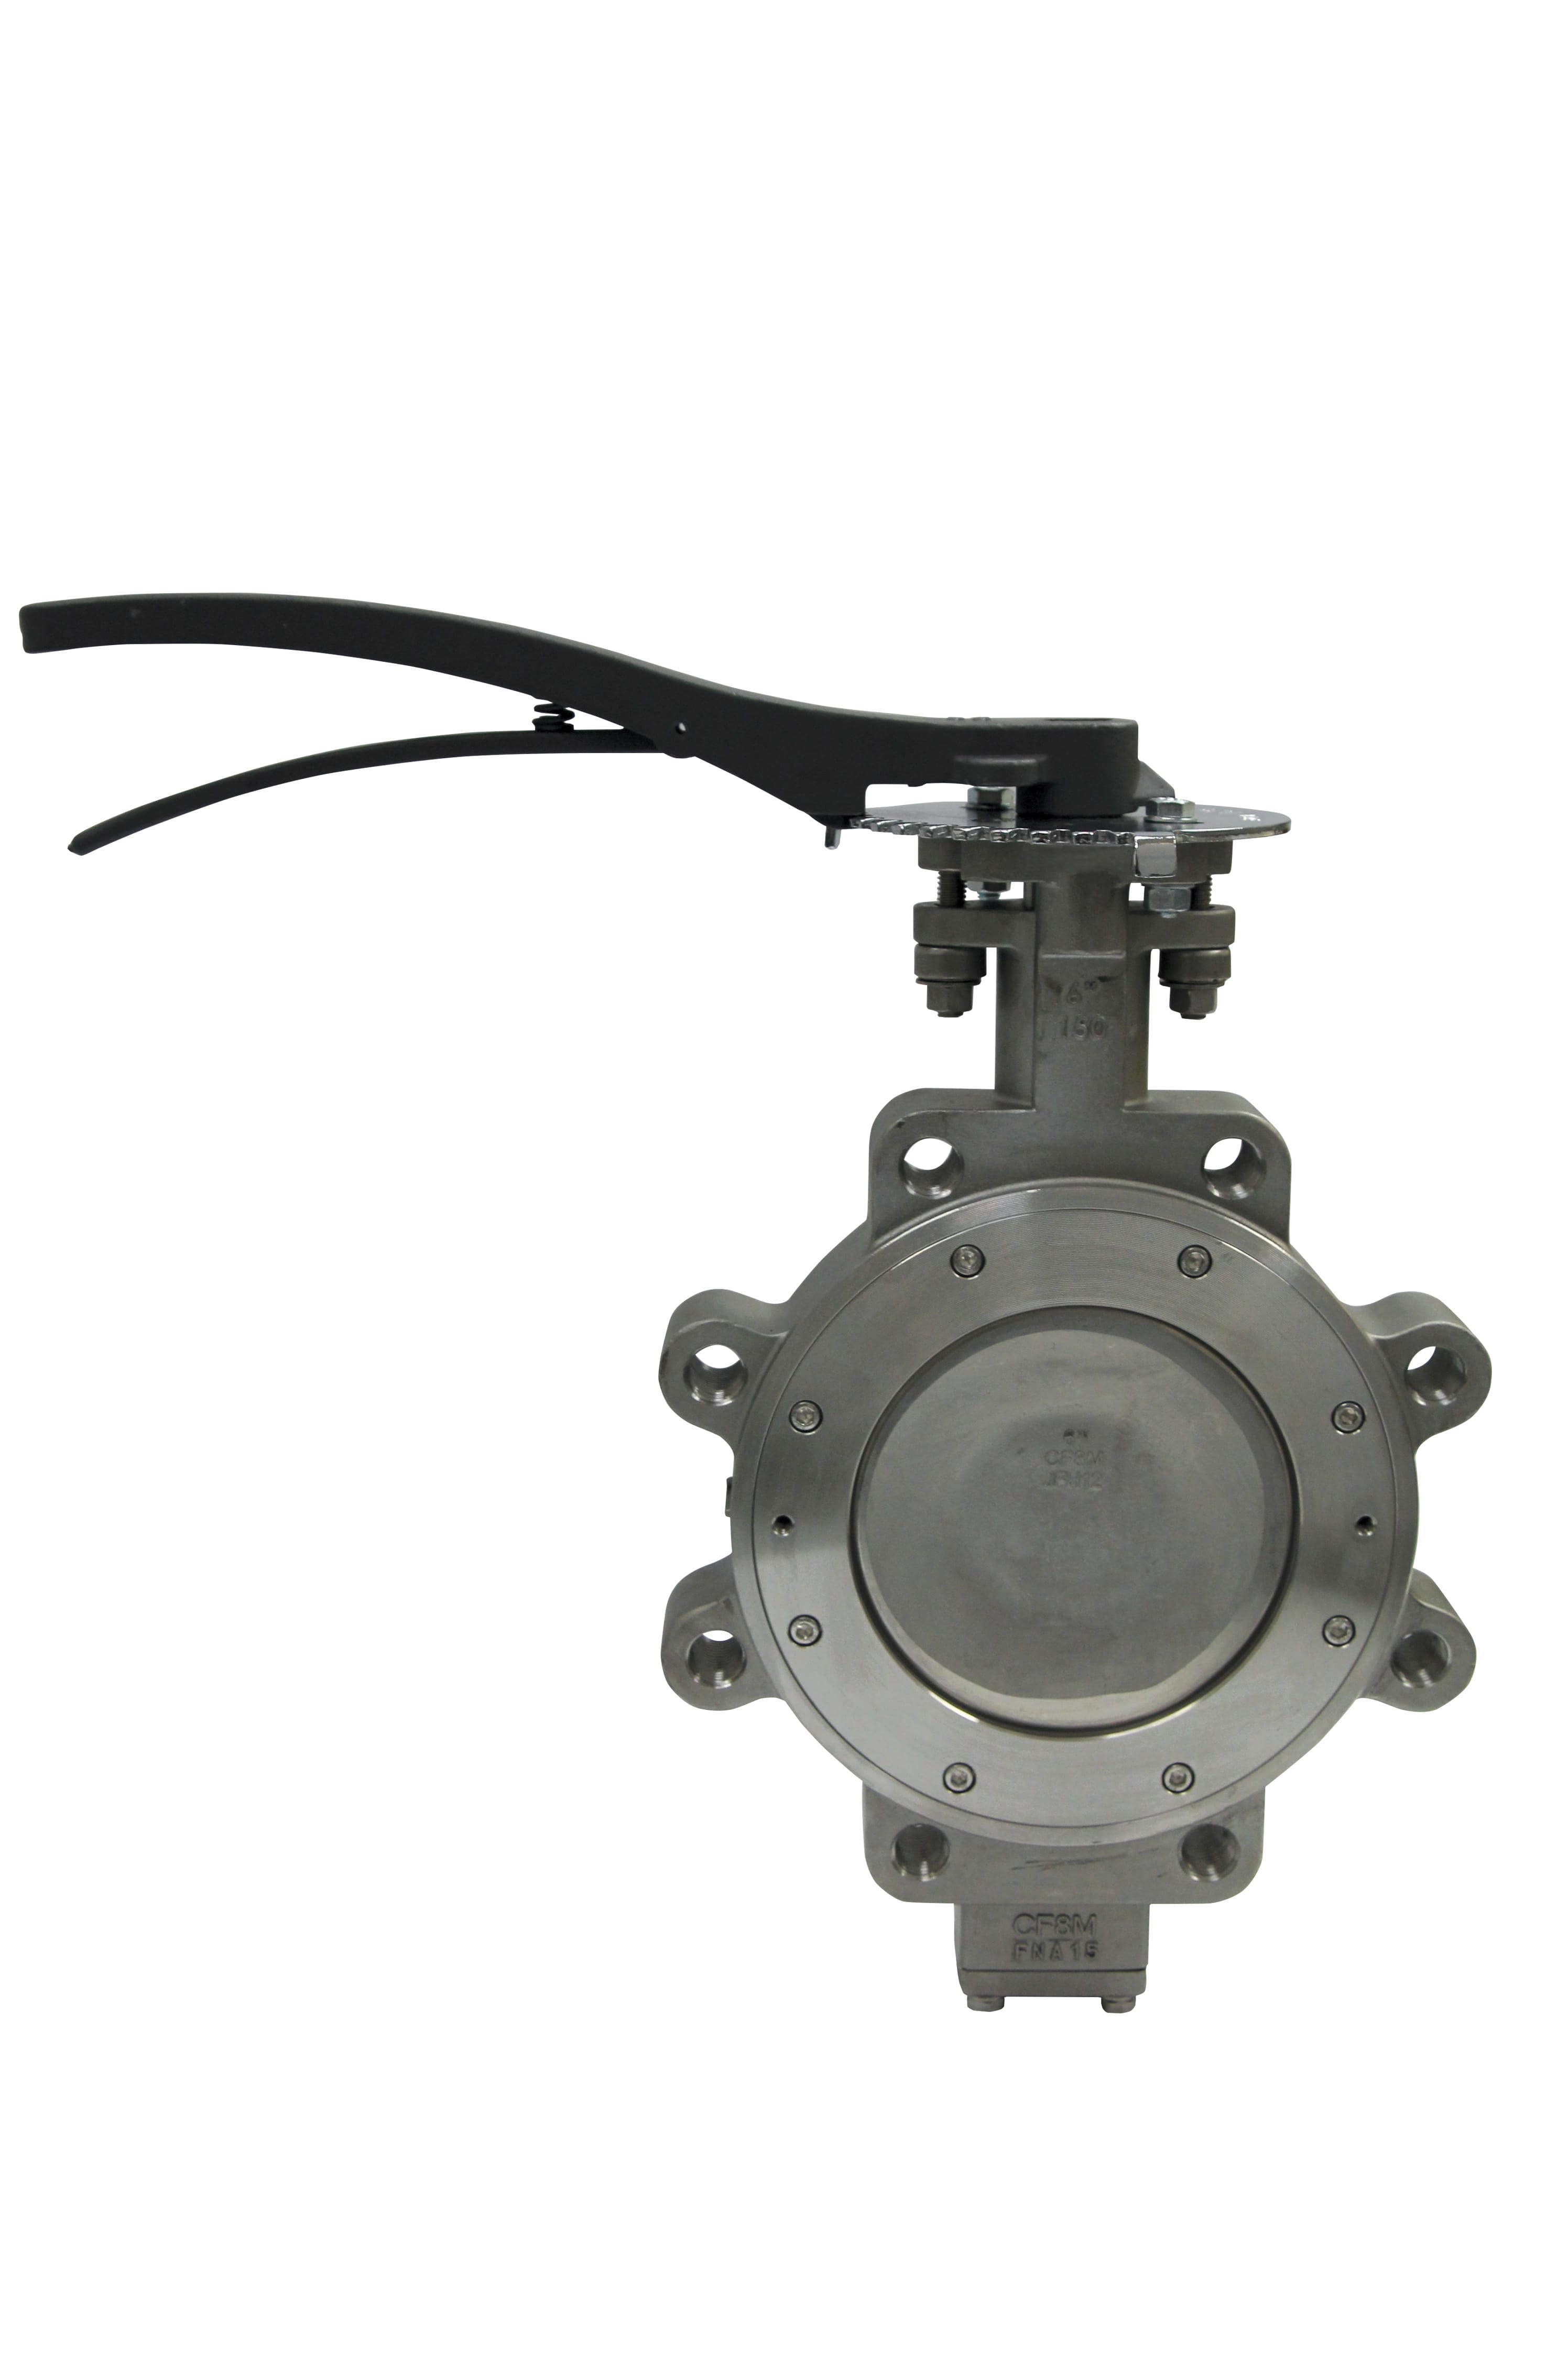 Preview image for Apollo Class 300 Carbon Steel Butterfly Valve with Stainless Steel Disc, 17-4 PH SS Stem & Pin, RTFM Seats, Standard Service, Locking Worm Gear Operator (2 x Lug Type)